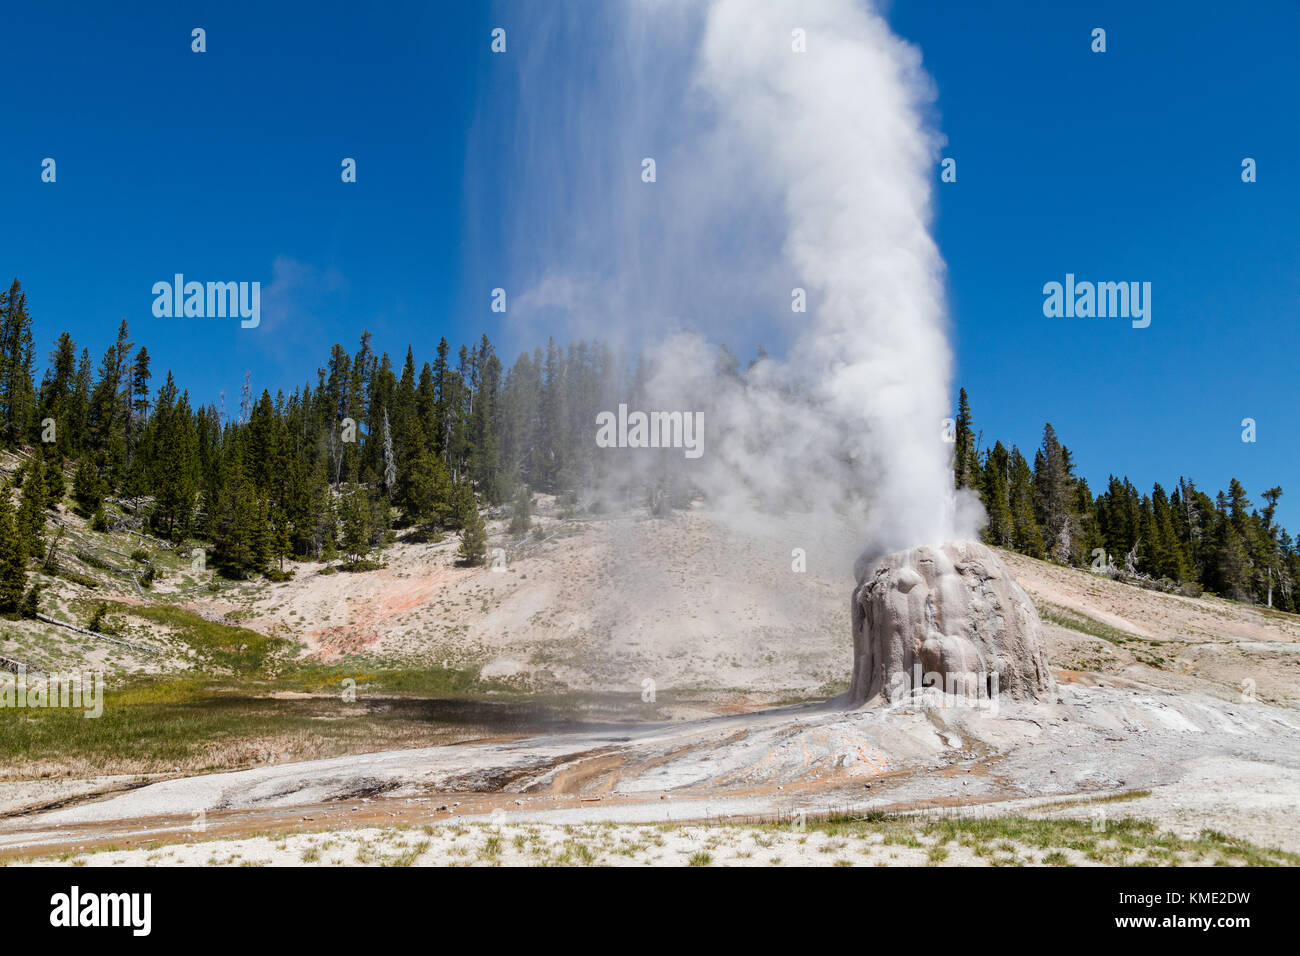 The Lonestar Geyser erupts at the Upper Geyser Basin at the Yellowstone National Park June 25, 2017 in Wyoming.  (photo by Jacob W. Frank via Planetpix) Stock Photo